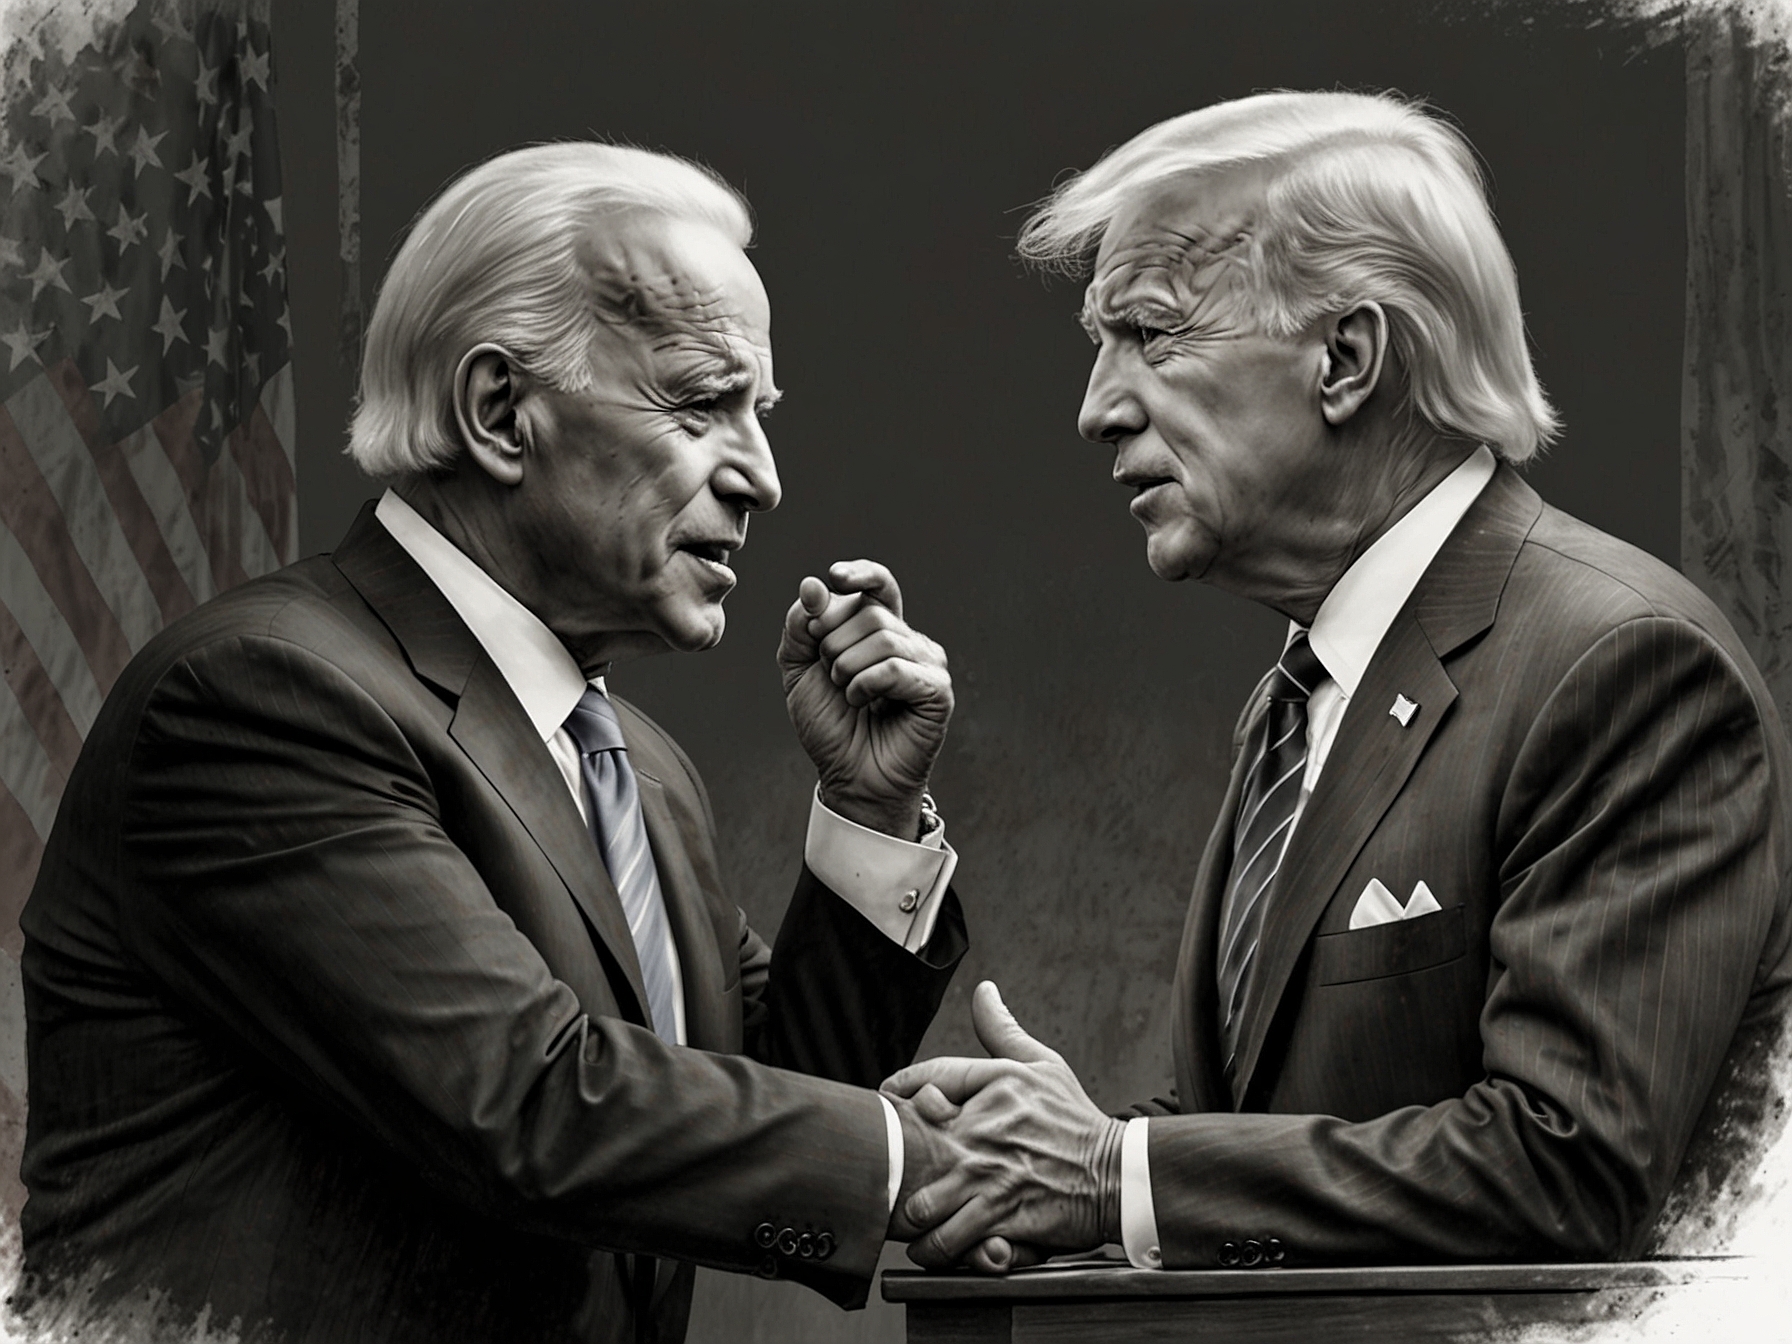 An illustration of President Biden and former President Trump engaging in a heated debate, with both candidates appearing frustrated and disconnected, reflecting the night's confrontational tone.